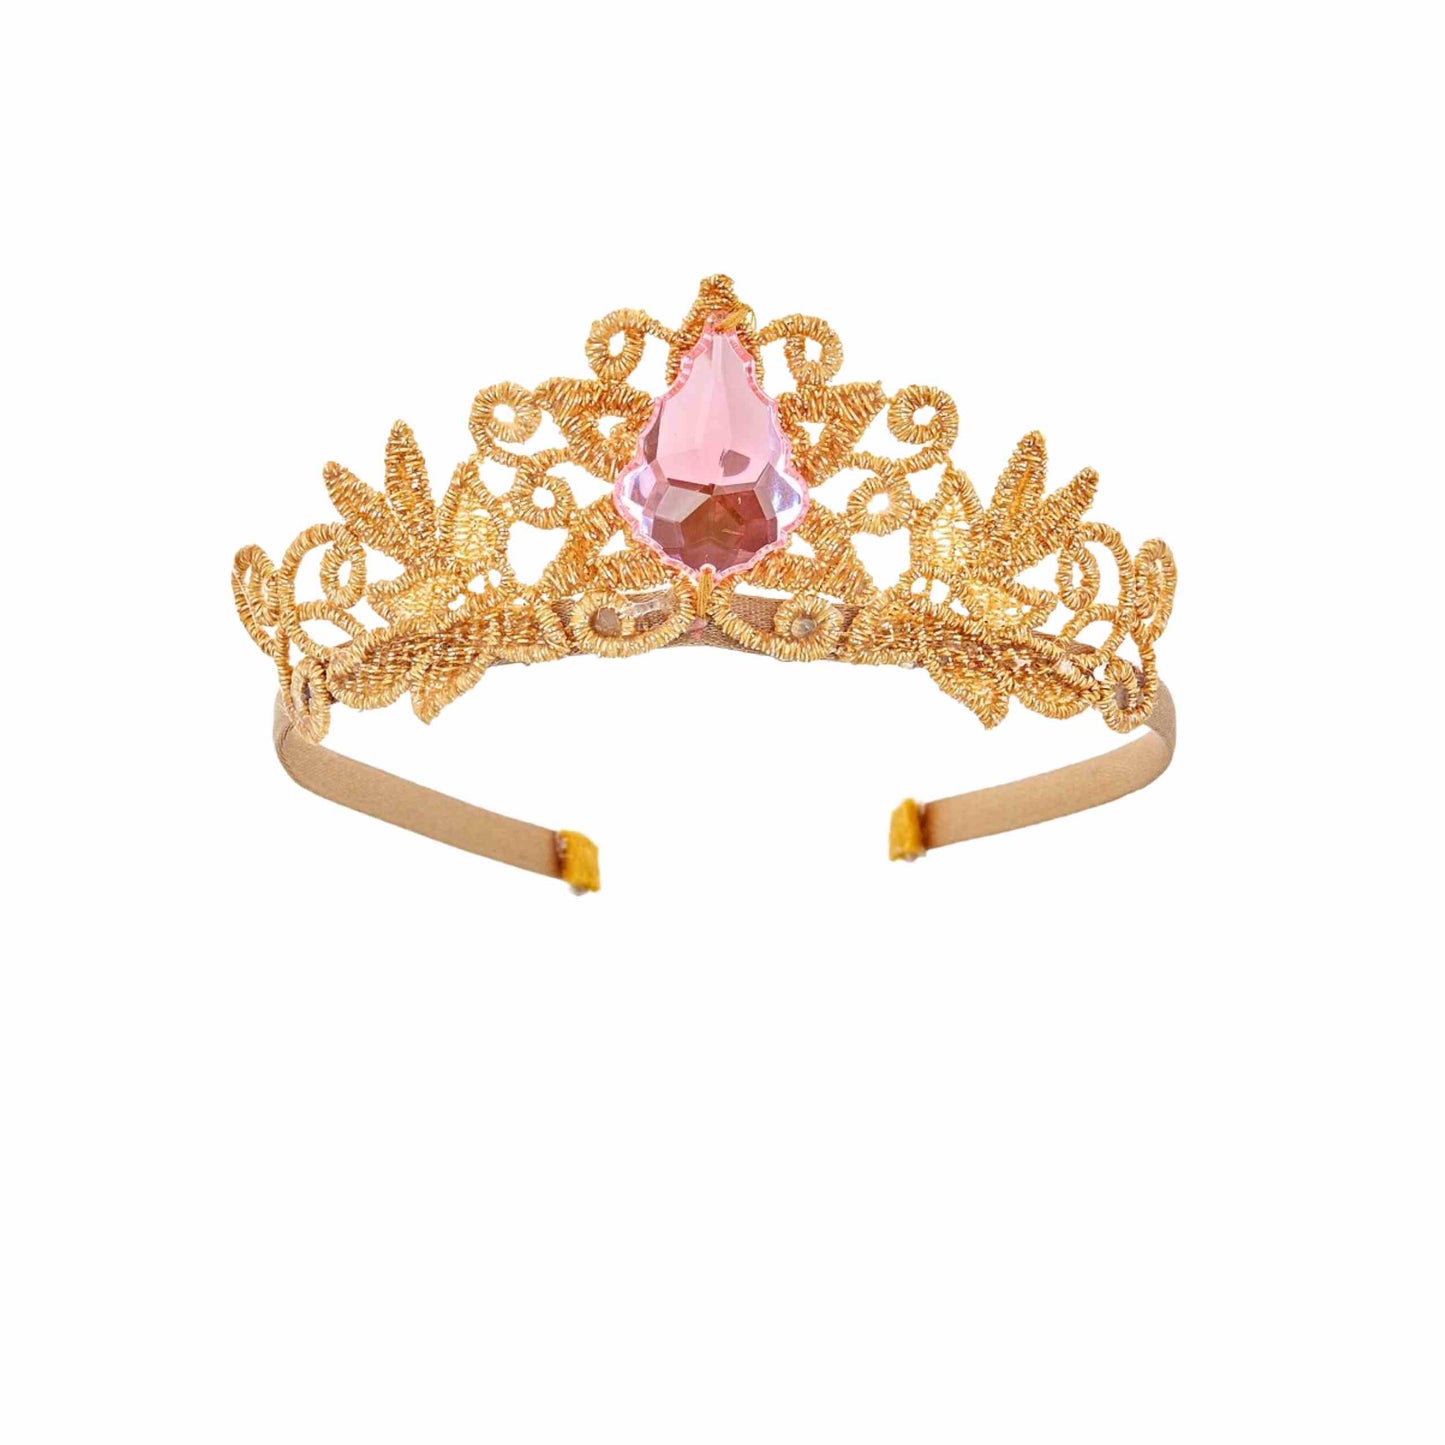 a tiara with a pink stone in the center